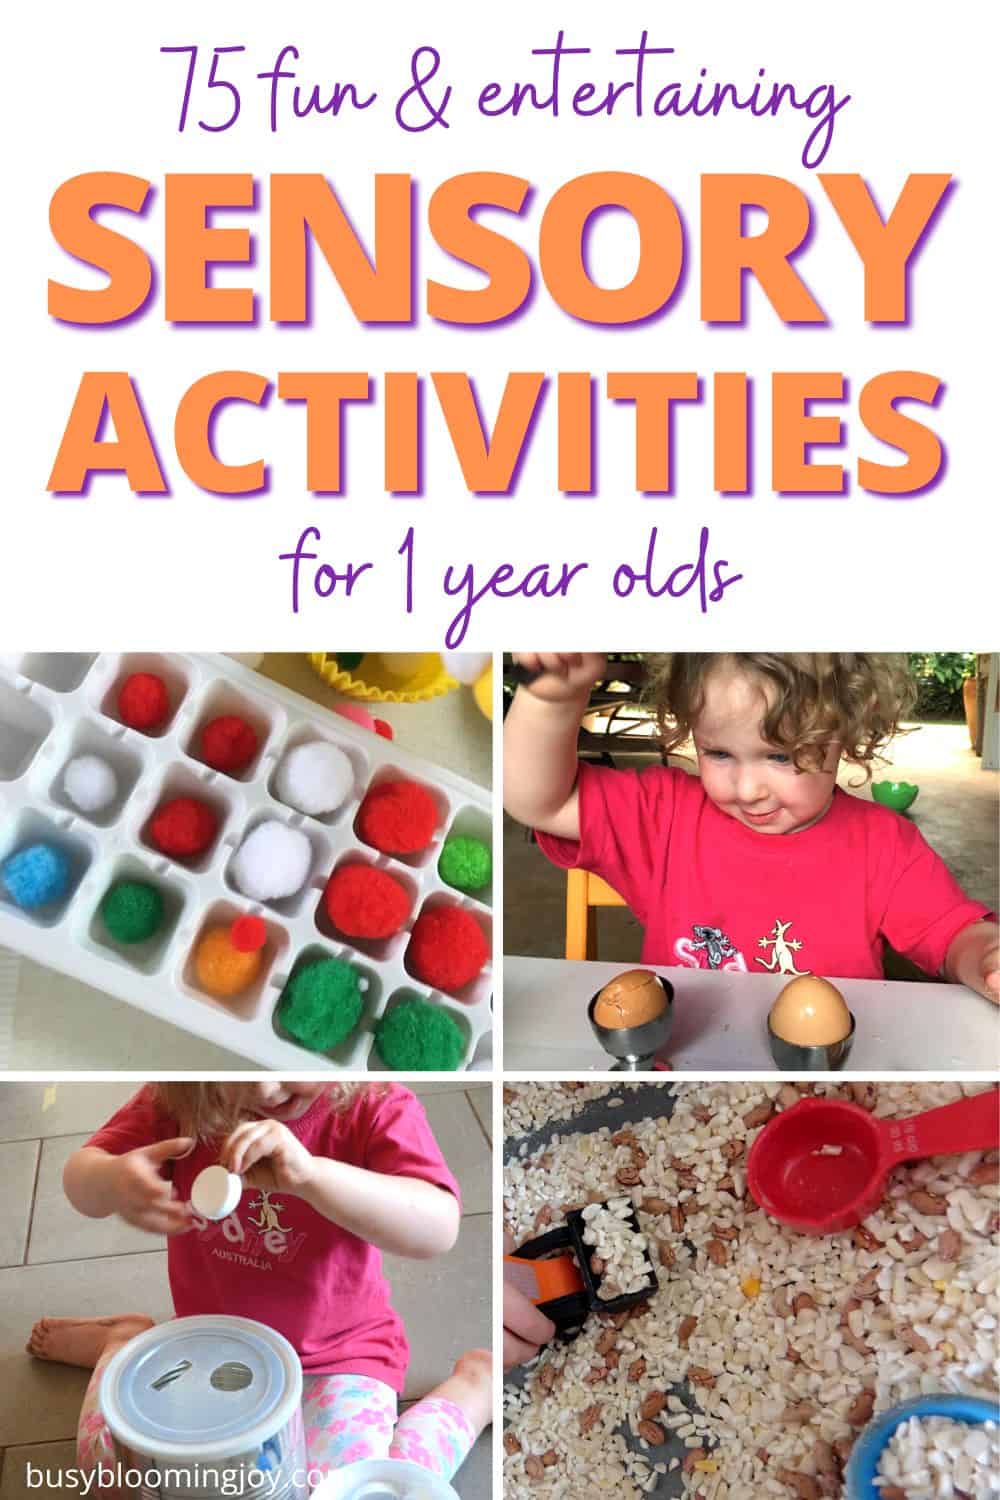 feature image for sensory activities for 1 year olds